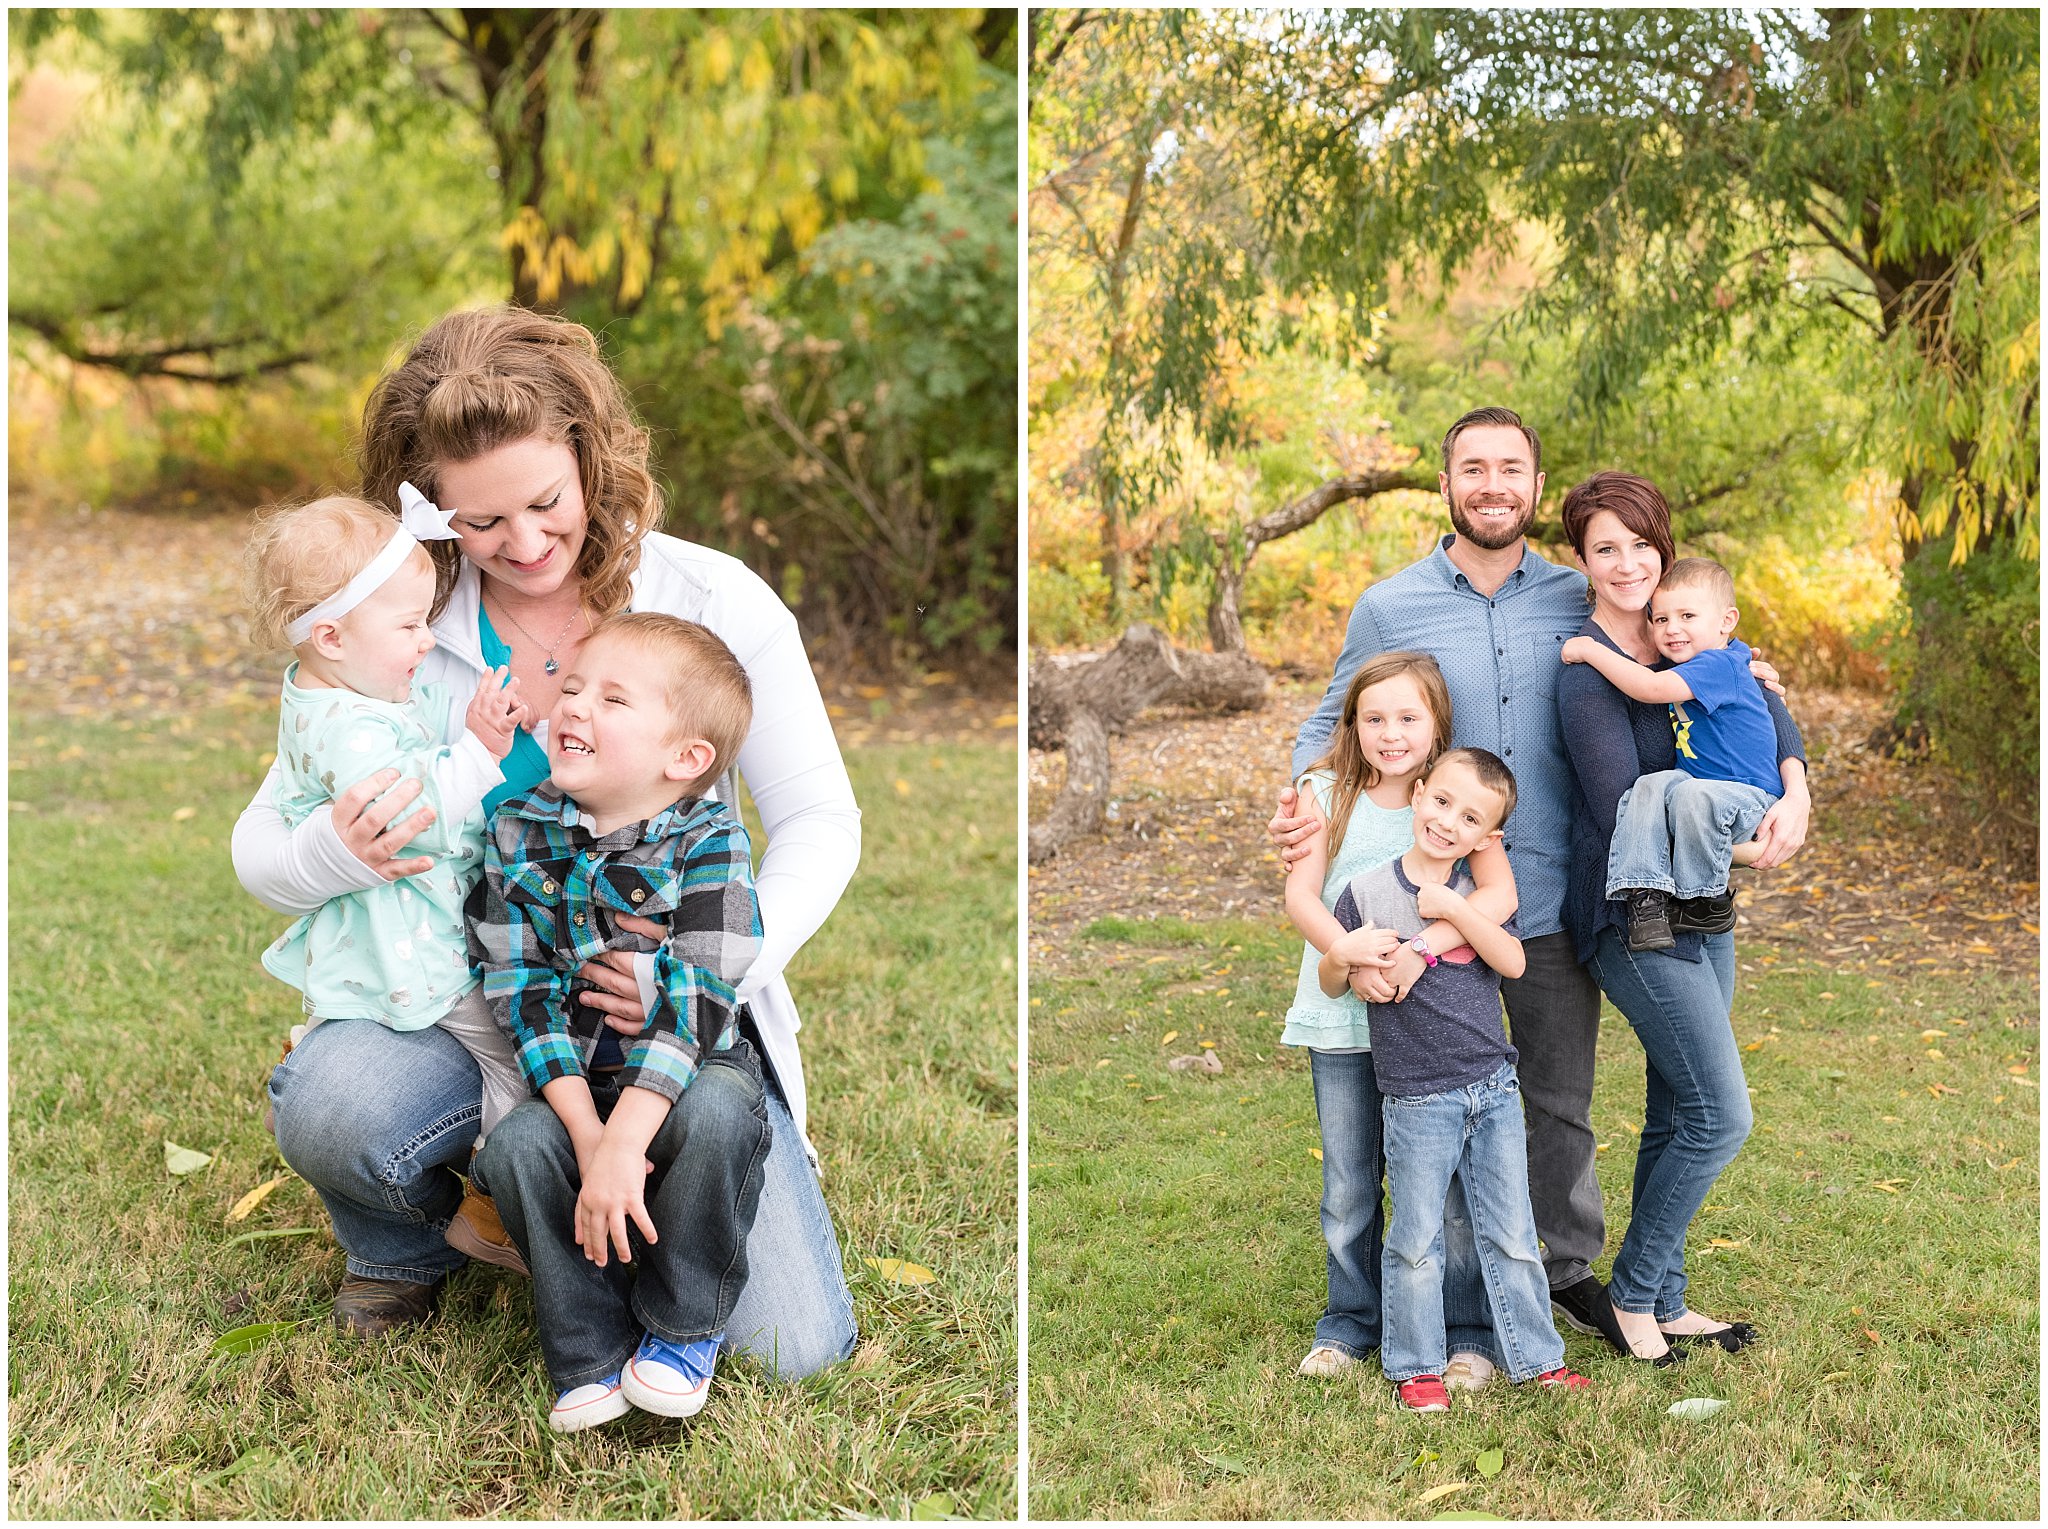 Families looking at camera and laughing during pictures | Tremonton Family Pictures and Make a Wish Event | Jessie and Dallin Photography